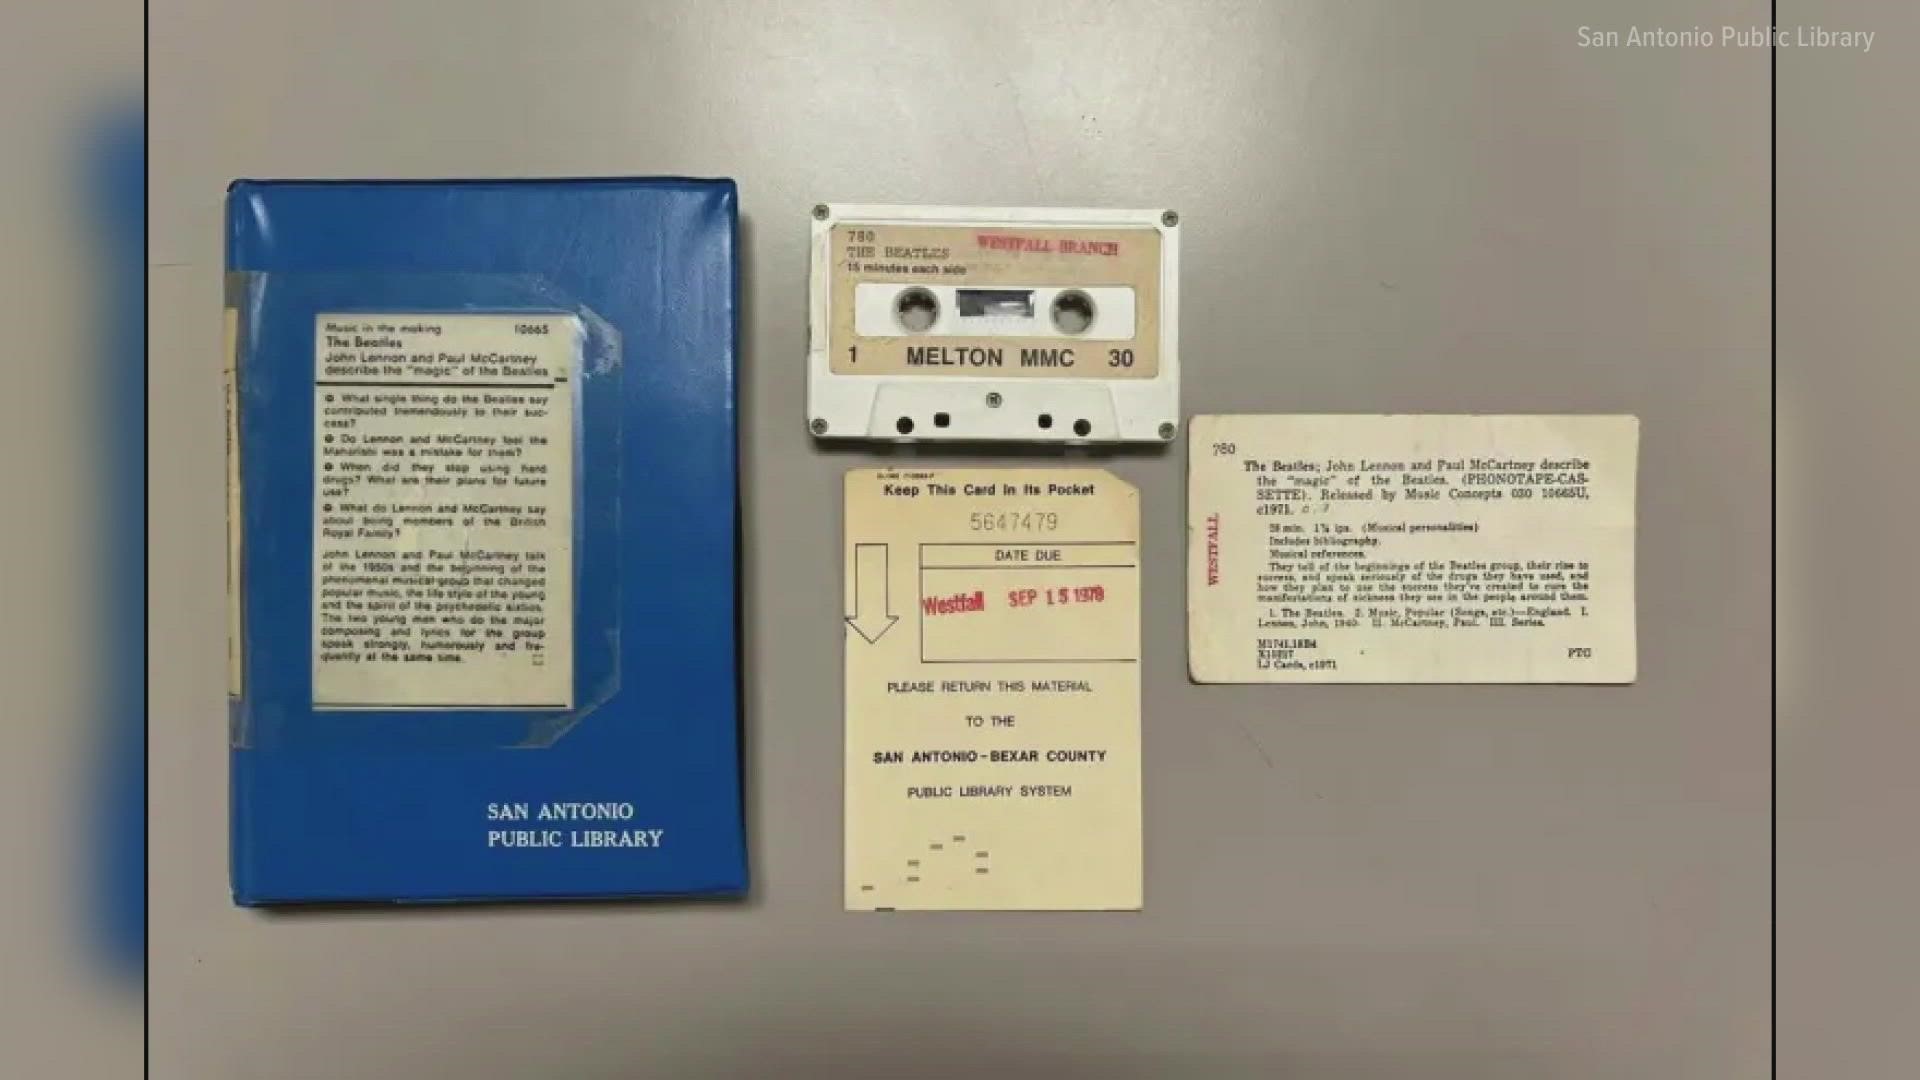 A Beatles cassette tape, checked out 44 years ago, was finally returned this month.